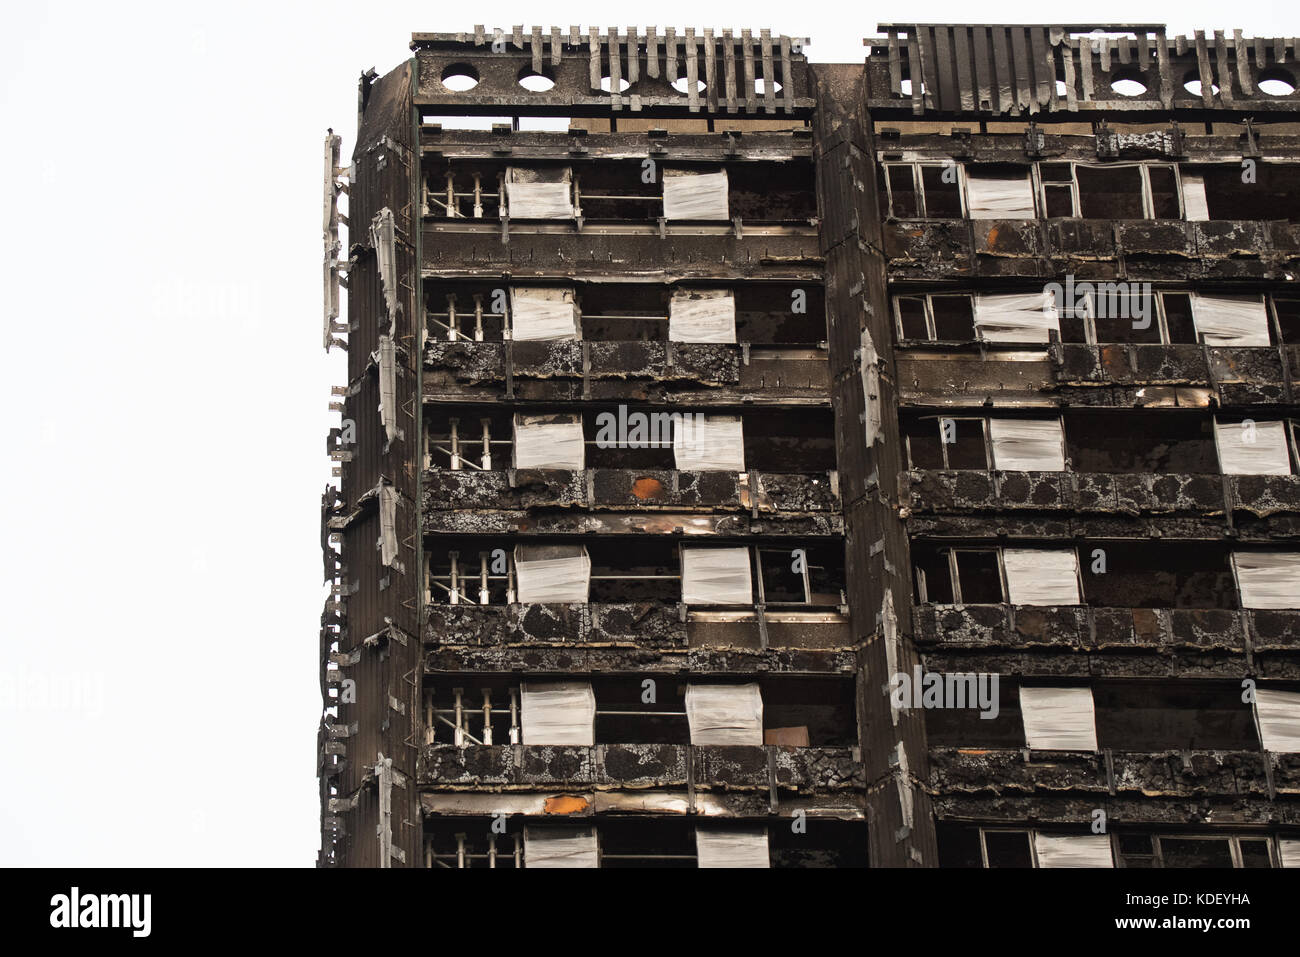 Grenfell Tower Block of Flats Latimer Road London 6th October 2017 3 months after the fire Stock Photo